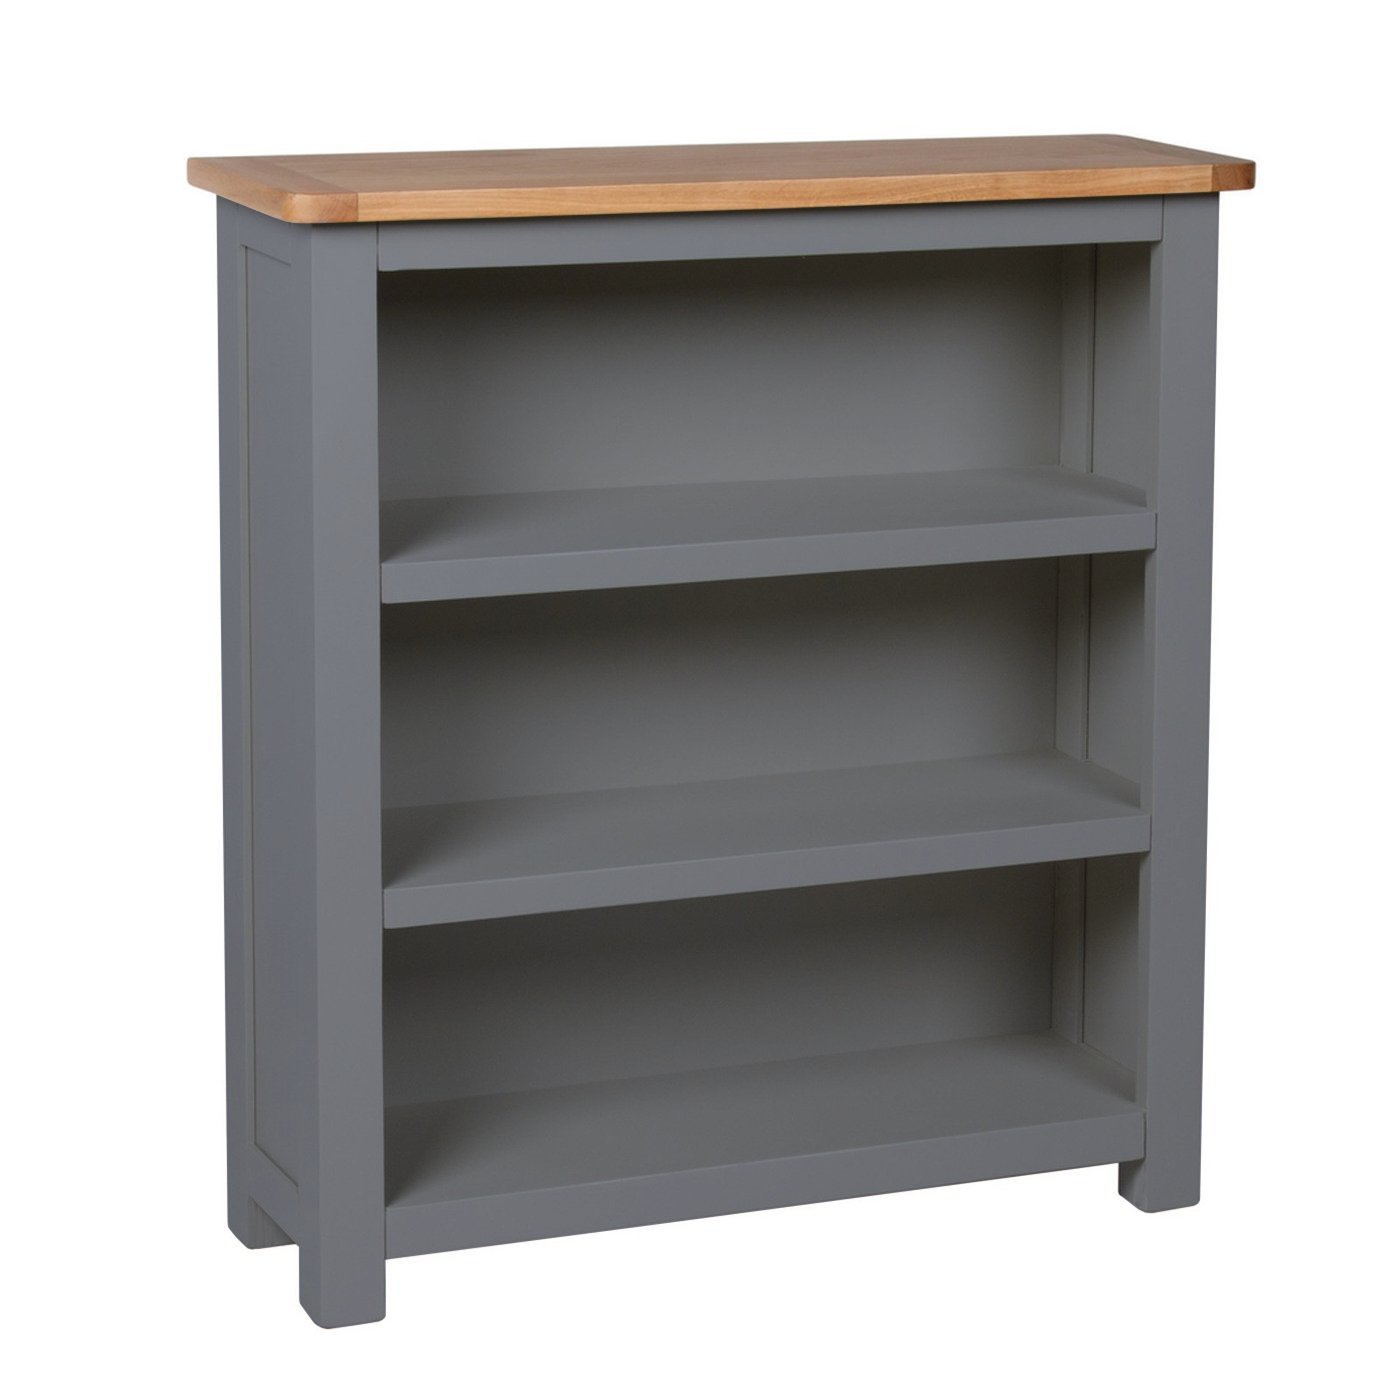 Farrow Grey Painted Large Bookcase Living Room Furniture Bookcases